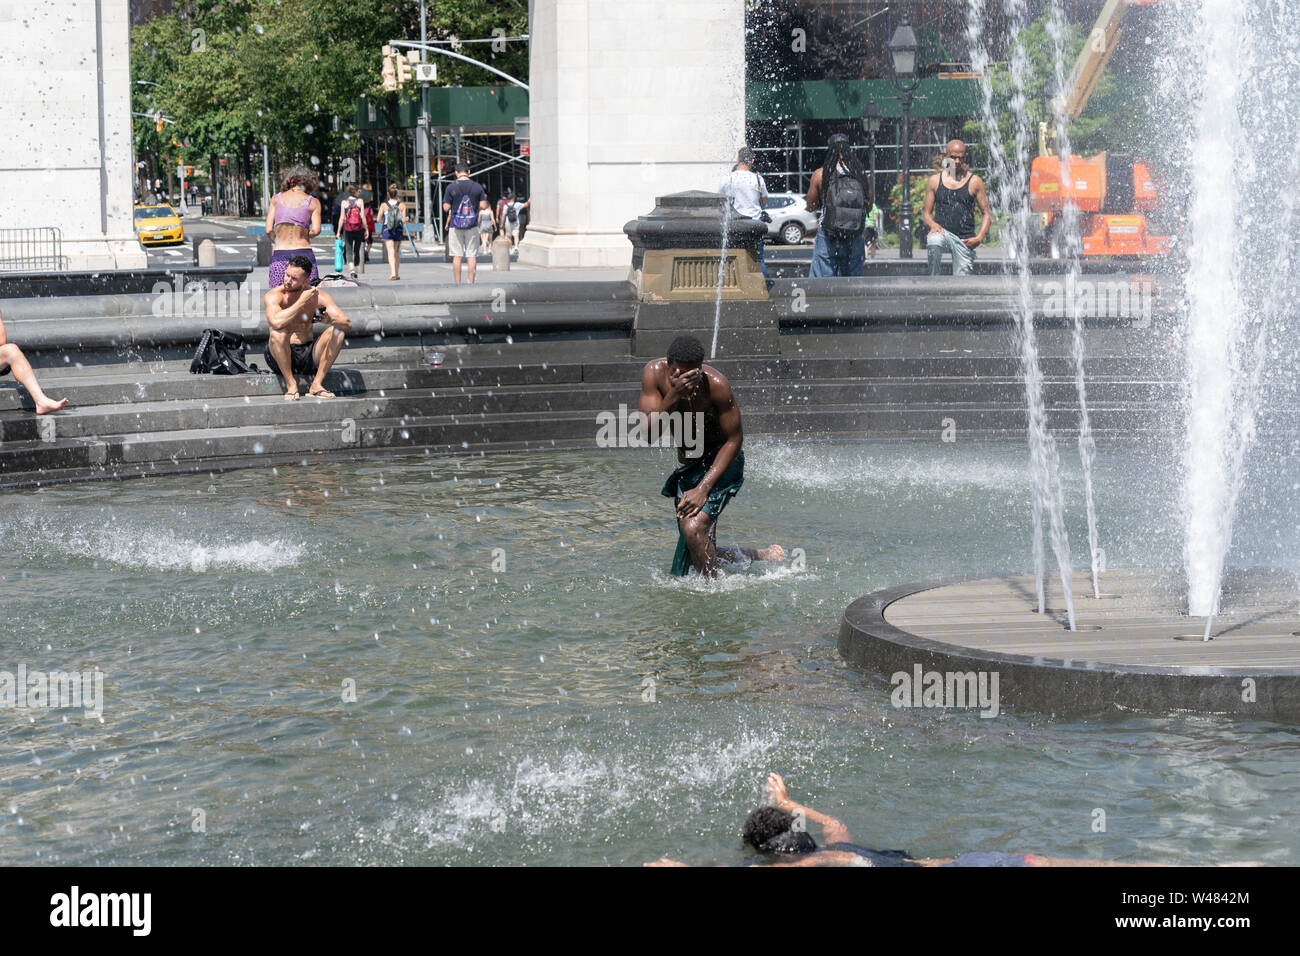 New York, NY - July 20, 2019: New Yorkers cool down in Washington Square fountain as extreme heat wave hit city and temperature reached 105 degrees Fahrenheit (40 degrees Celsius) Stock Photo